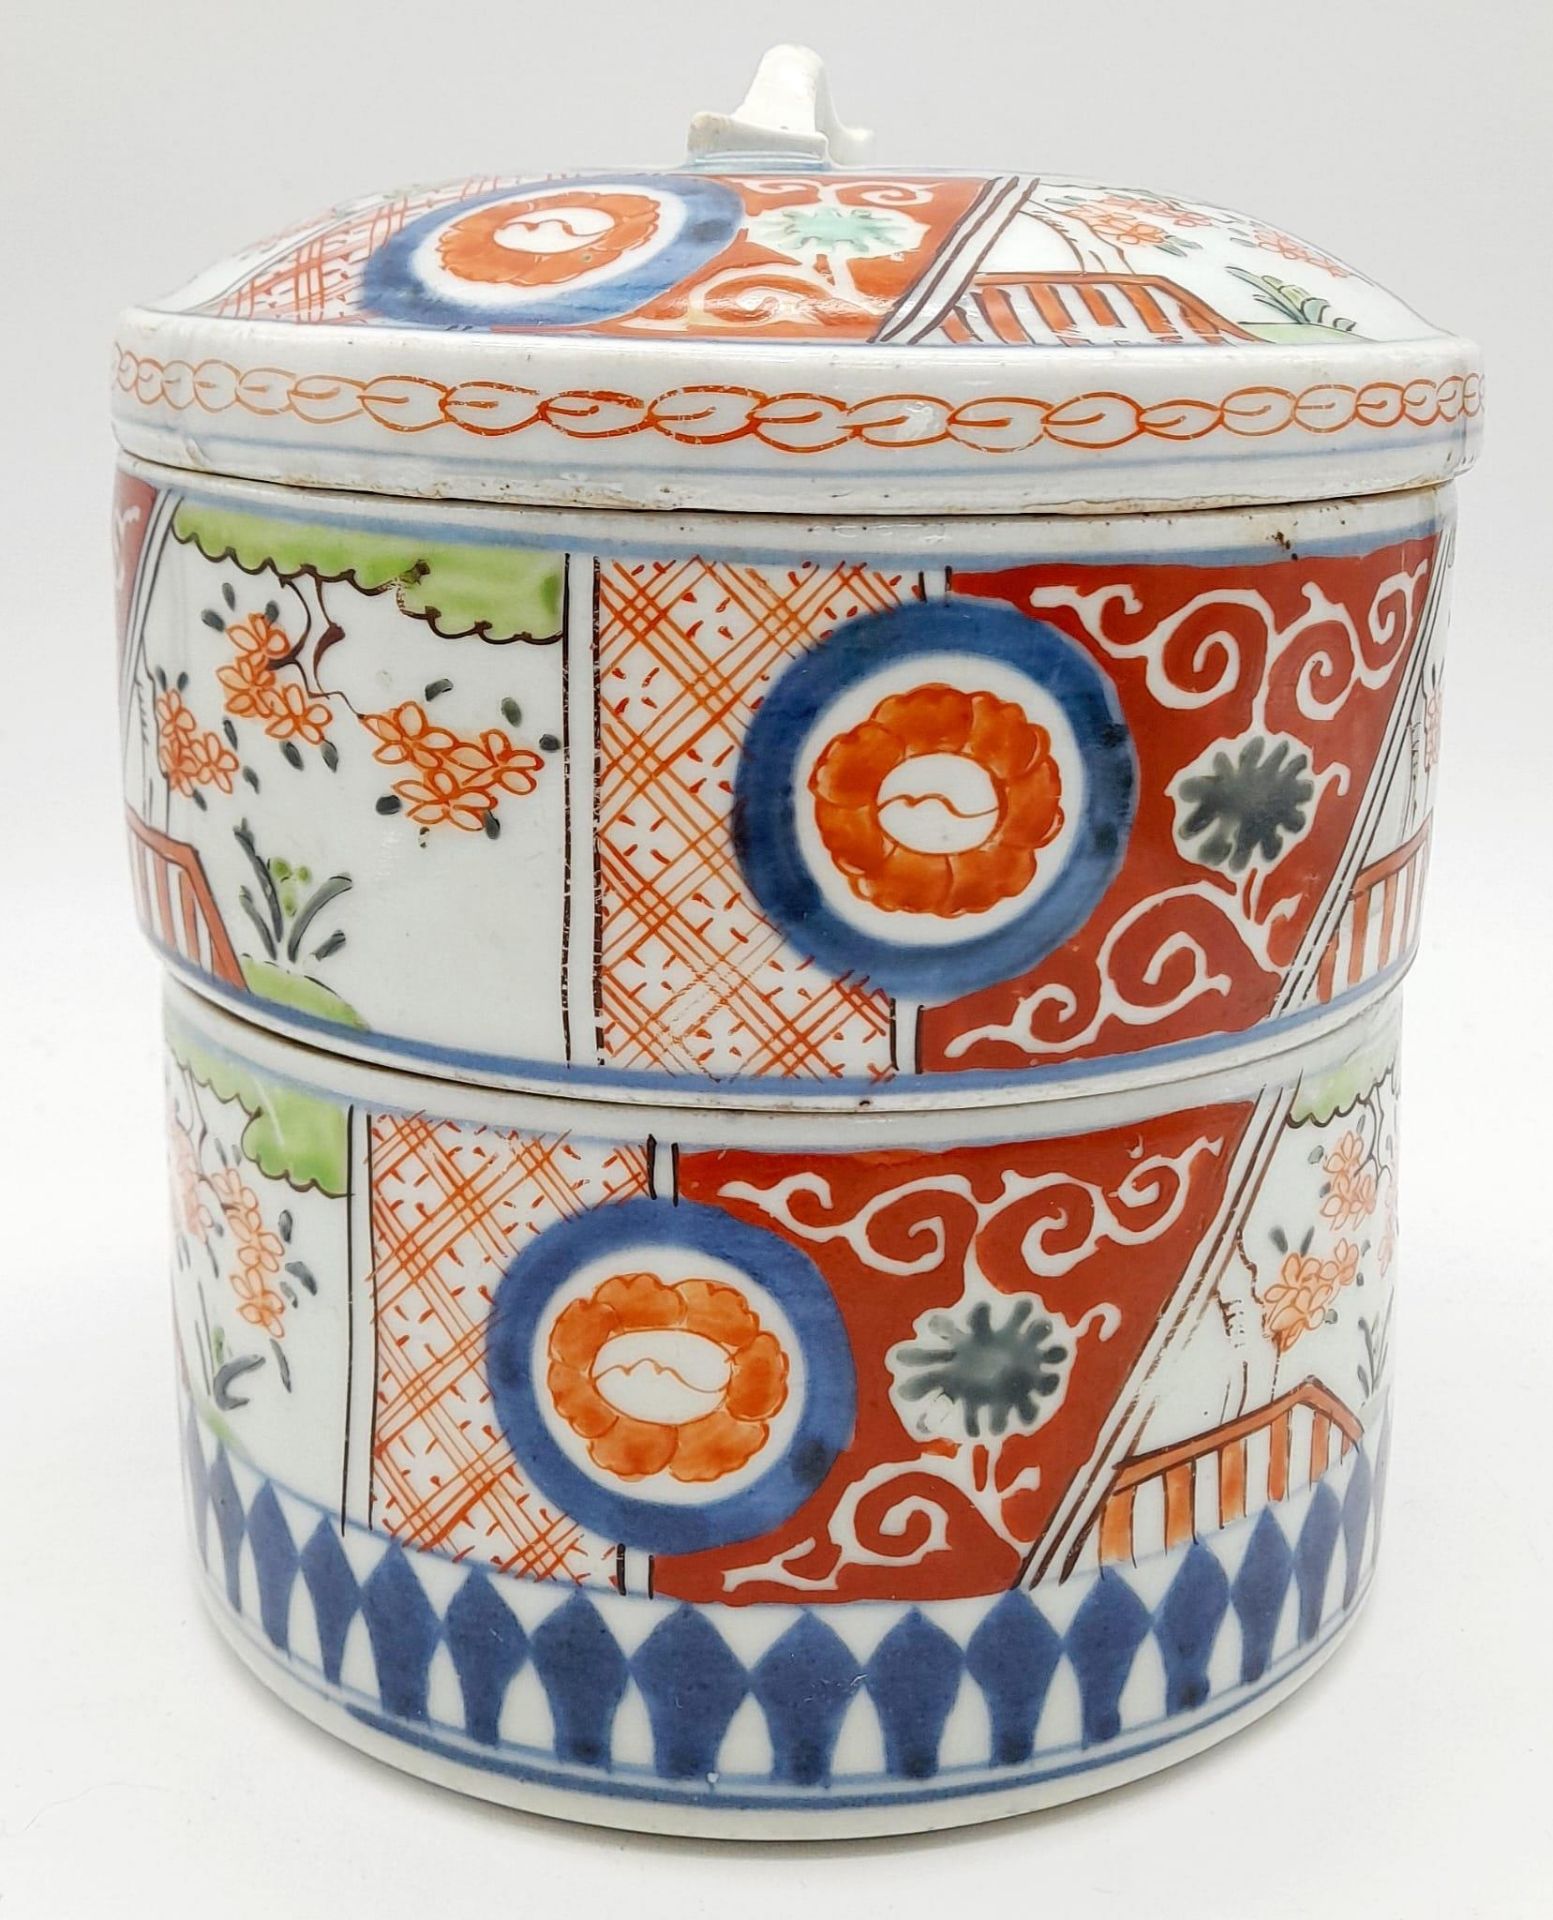 A Superb Antique (Mid 19th century) Japanese Double Tier Box with Lid. Wonderful colours in the - Image 2 of 7